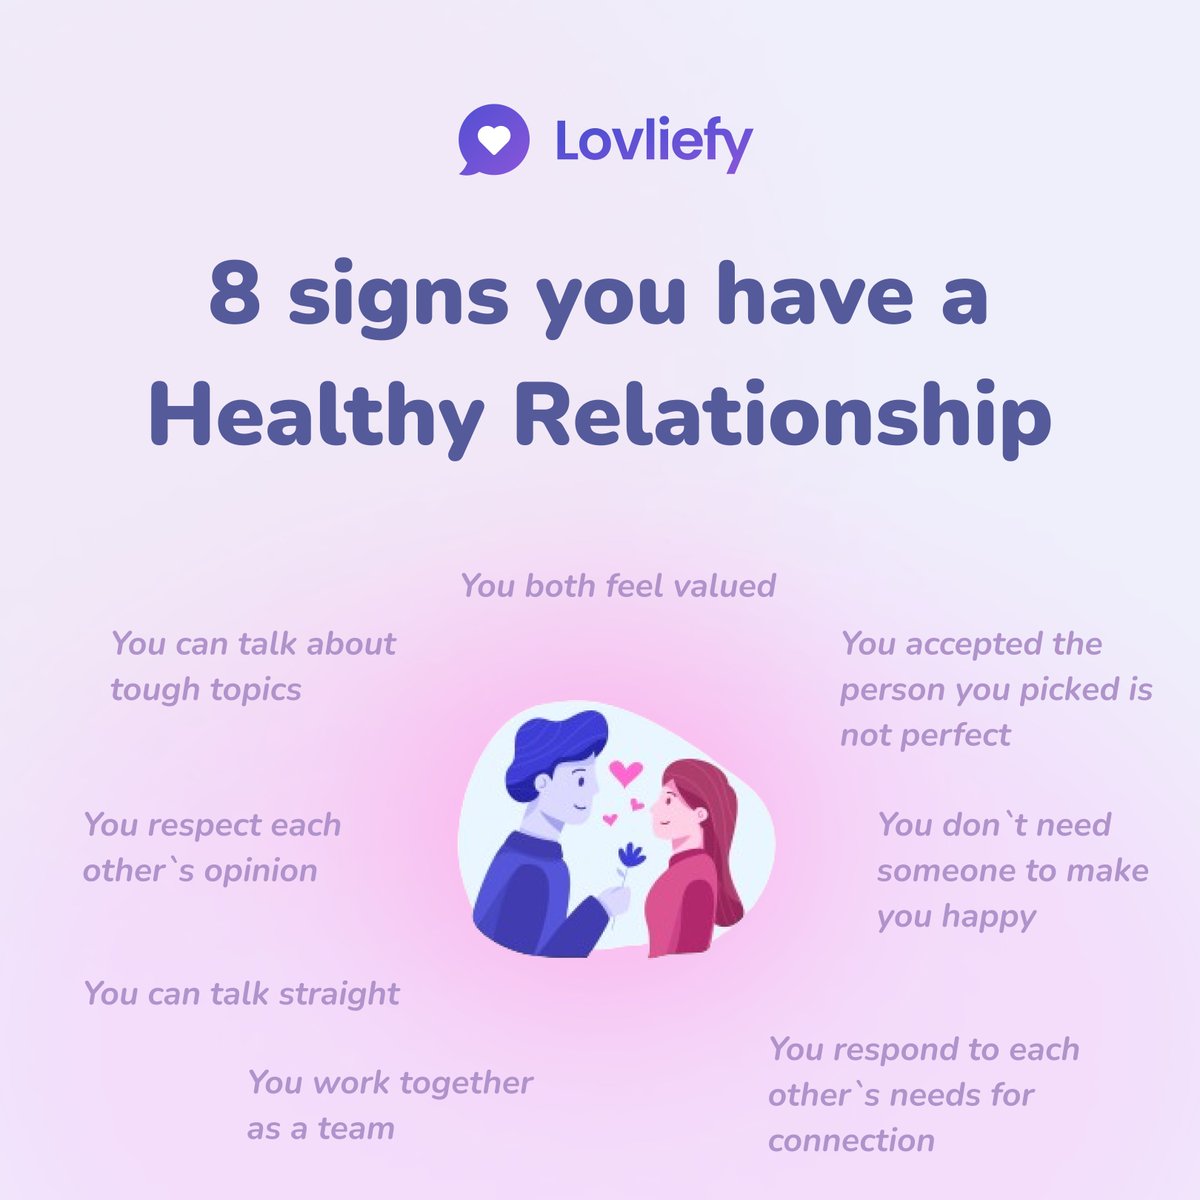 Healthy relationships are built on a foundation of mutual respect, understanding, and support. 
Are you seeing these signs in your relationship? Share your thoughts and experiences in the comments below! 💬✨ #HealthyRelationships #MutualRespect #EmotionalSupport